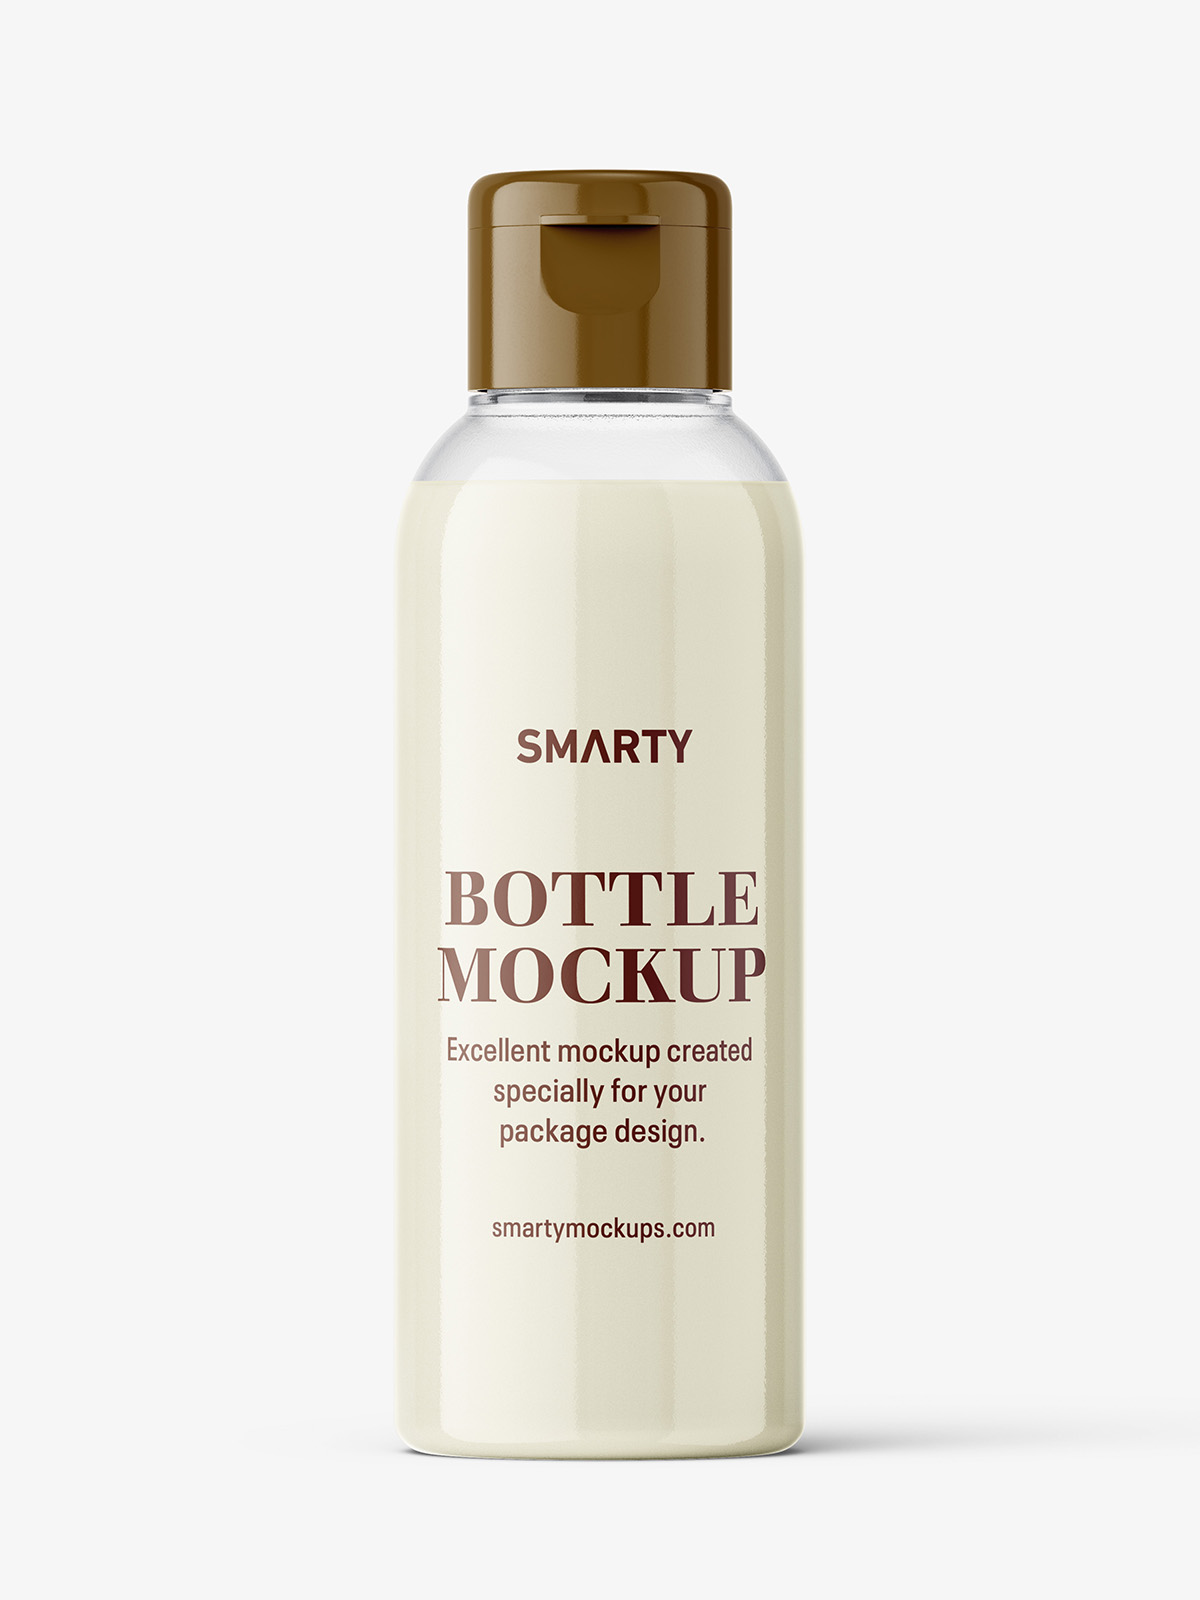 Small cream bottle with flip top mockup - Smarty Mockups